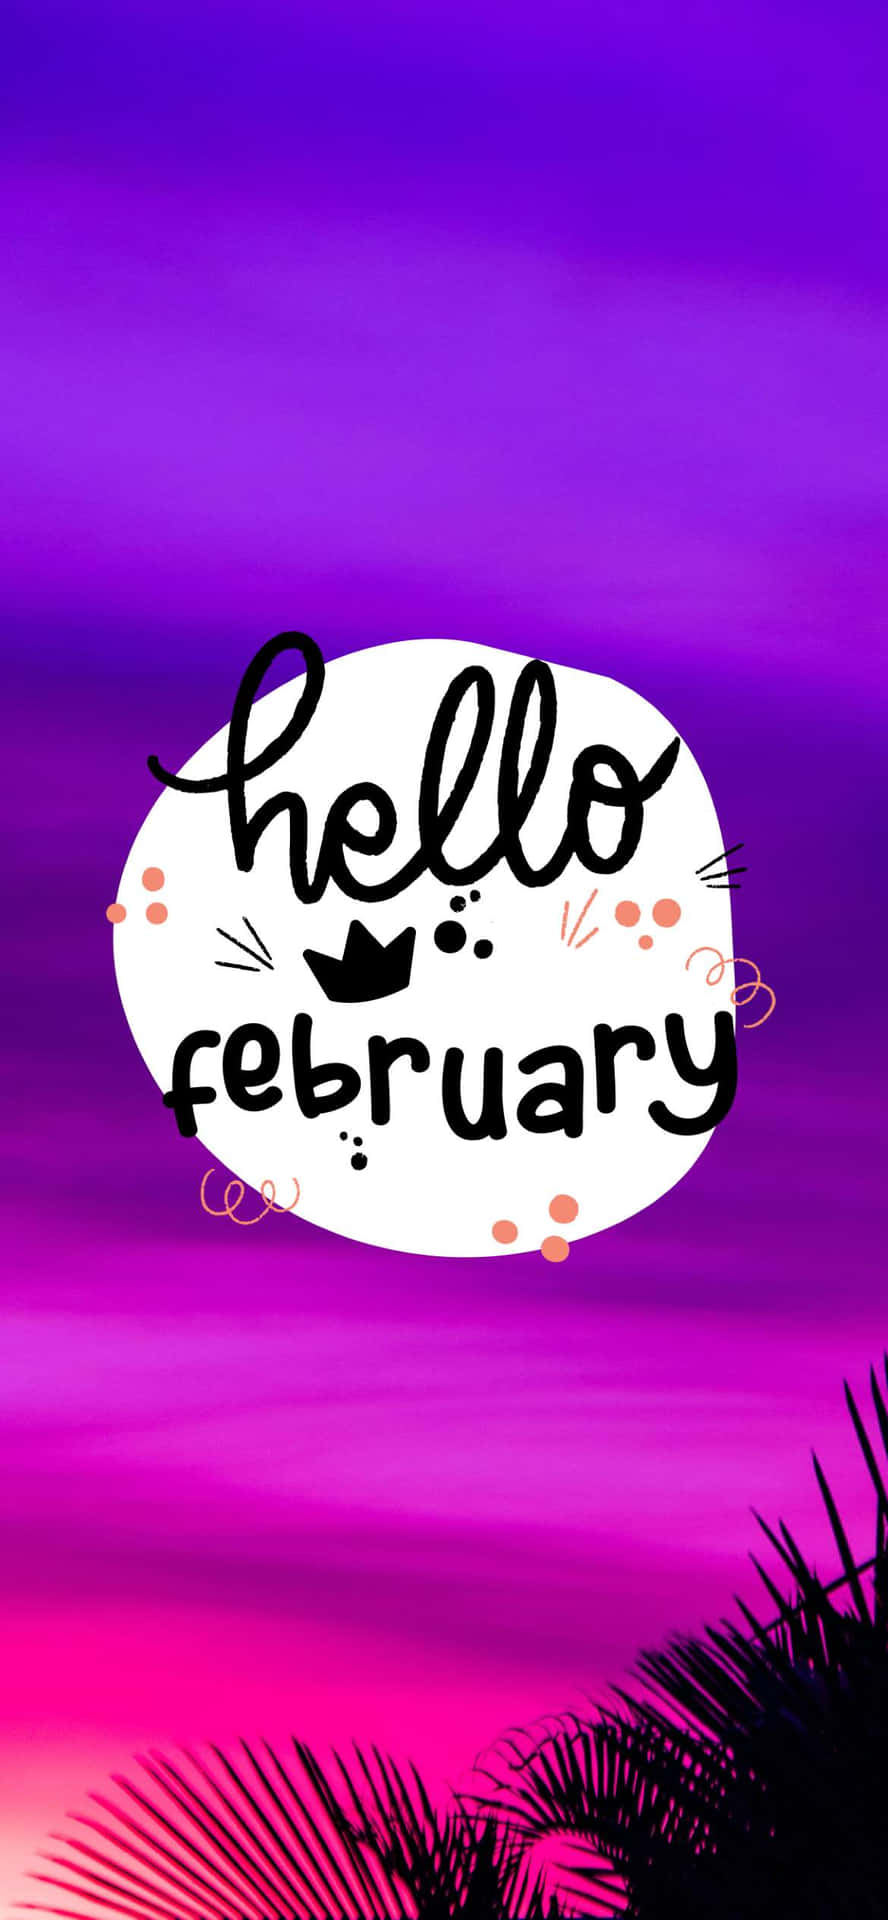 "Welcome, February - A Month of New Opportunities" Wallpaper